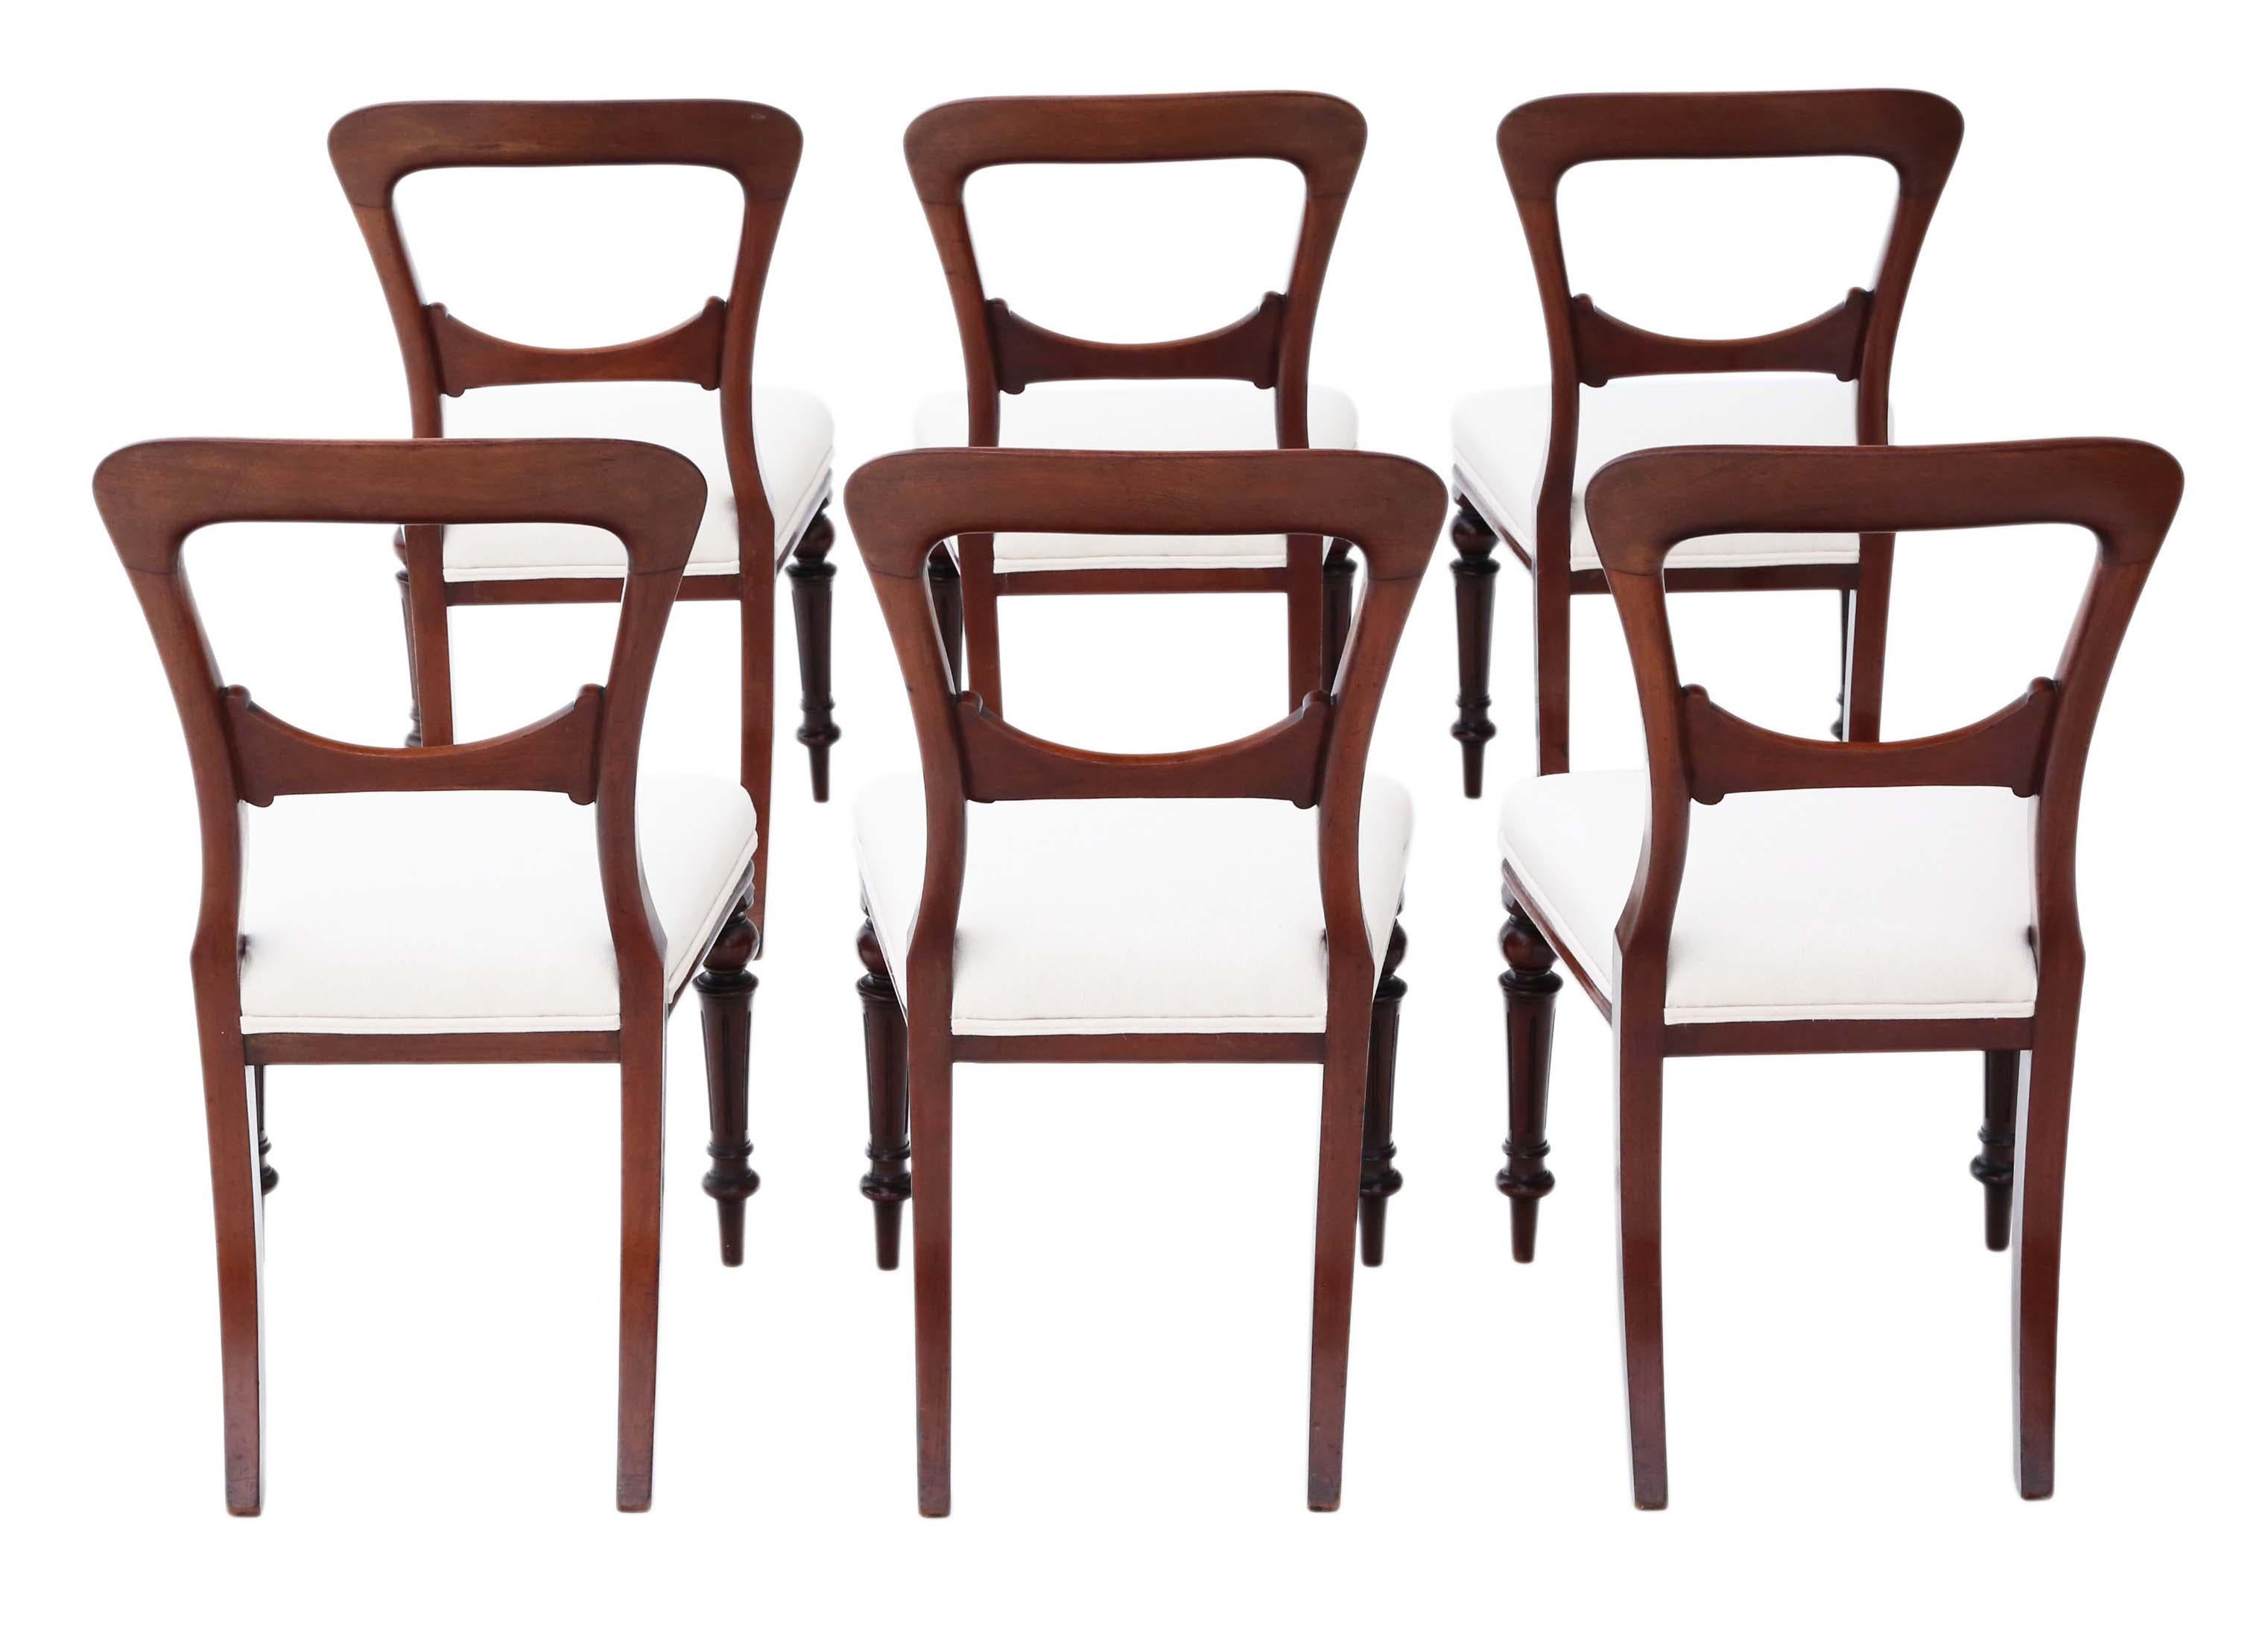 Antique fine quality set of 6 Victorian mahogany dining chairs, circa 1880.
Solid, heavy and strong with no loose joints and no woodworm.
New upholstery in a heavy weight fabric.
Overall maximum dimensions:
47cm W x 52cm D x 88cm H (44cm H seat